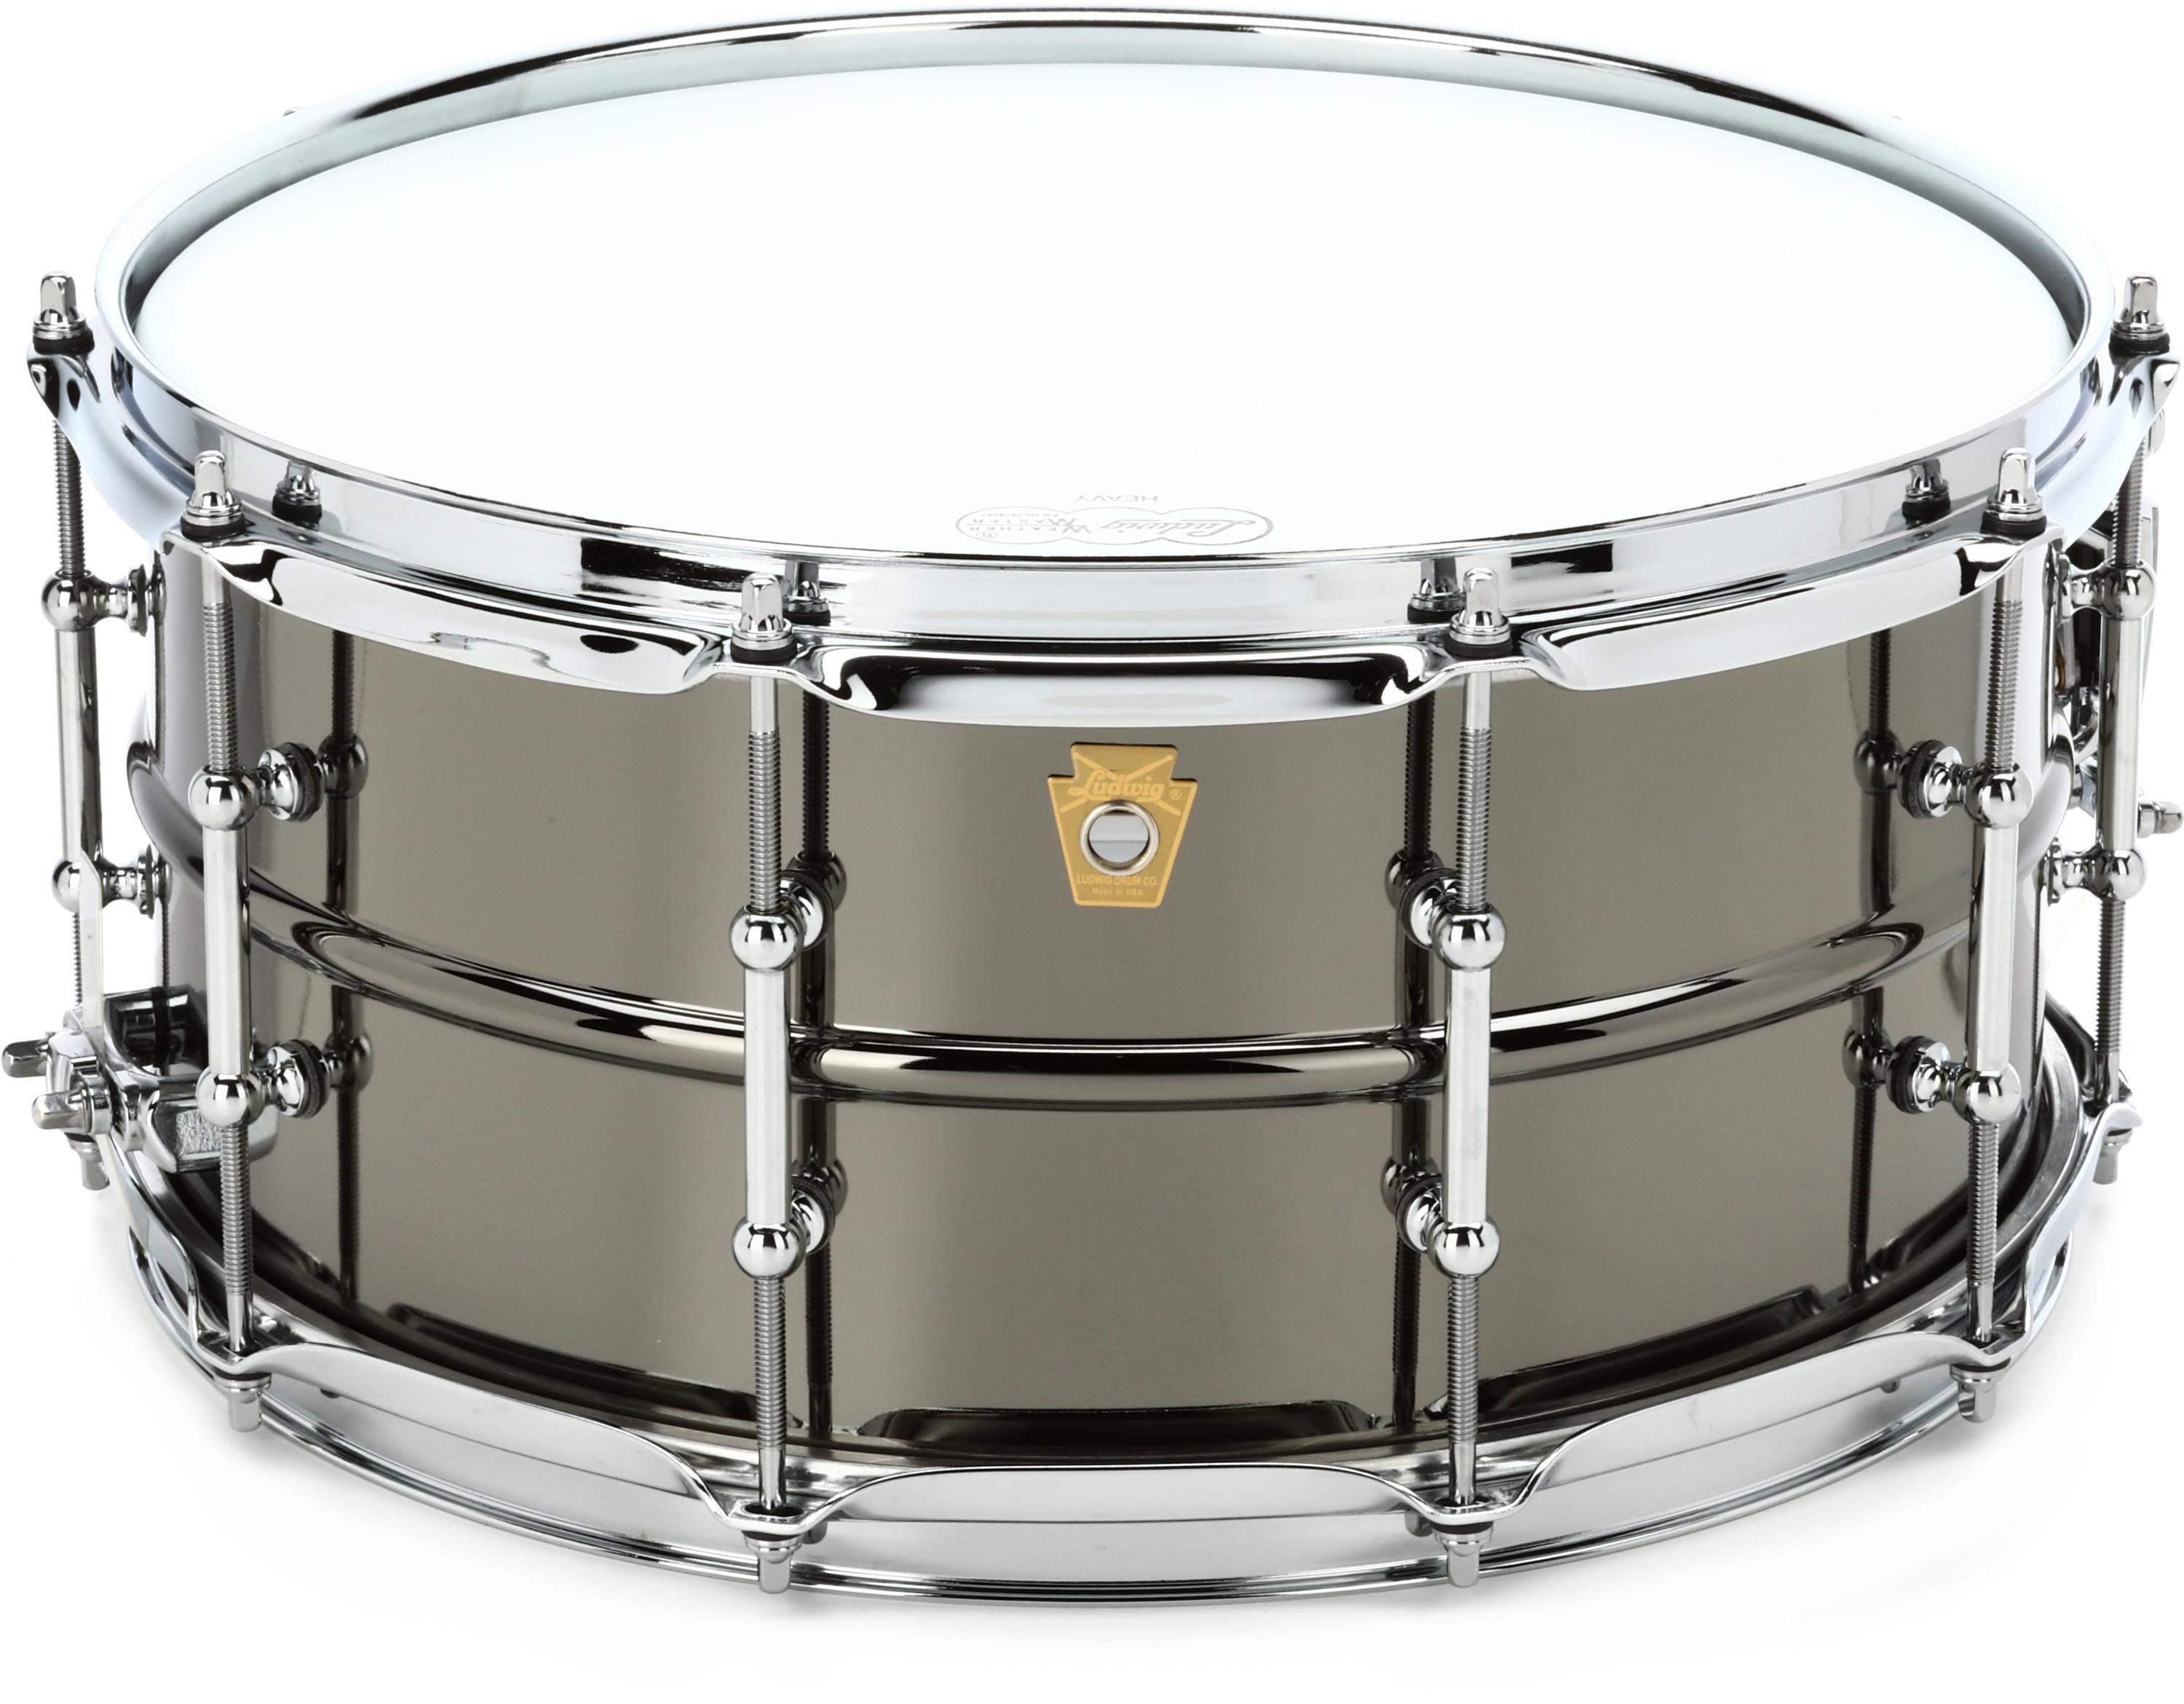 Ludwig Black Beauty Snare Drum - 6.5 x 14 inch - Black Nickel with Tube Lugs